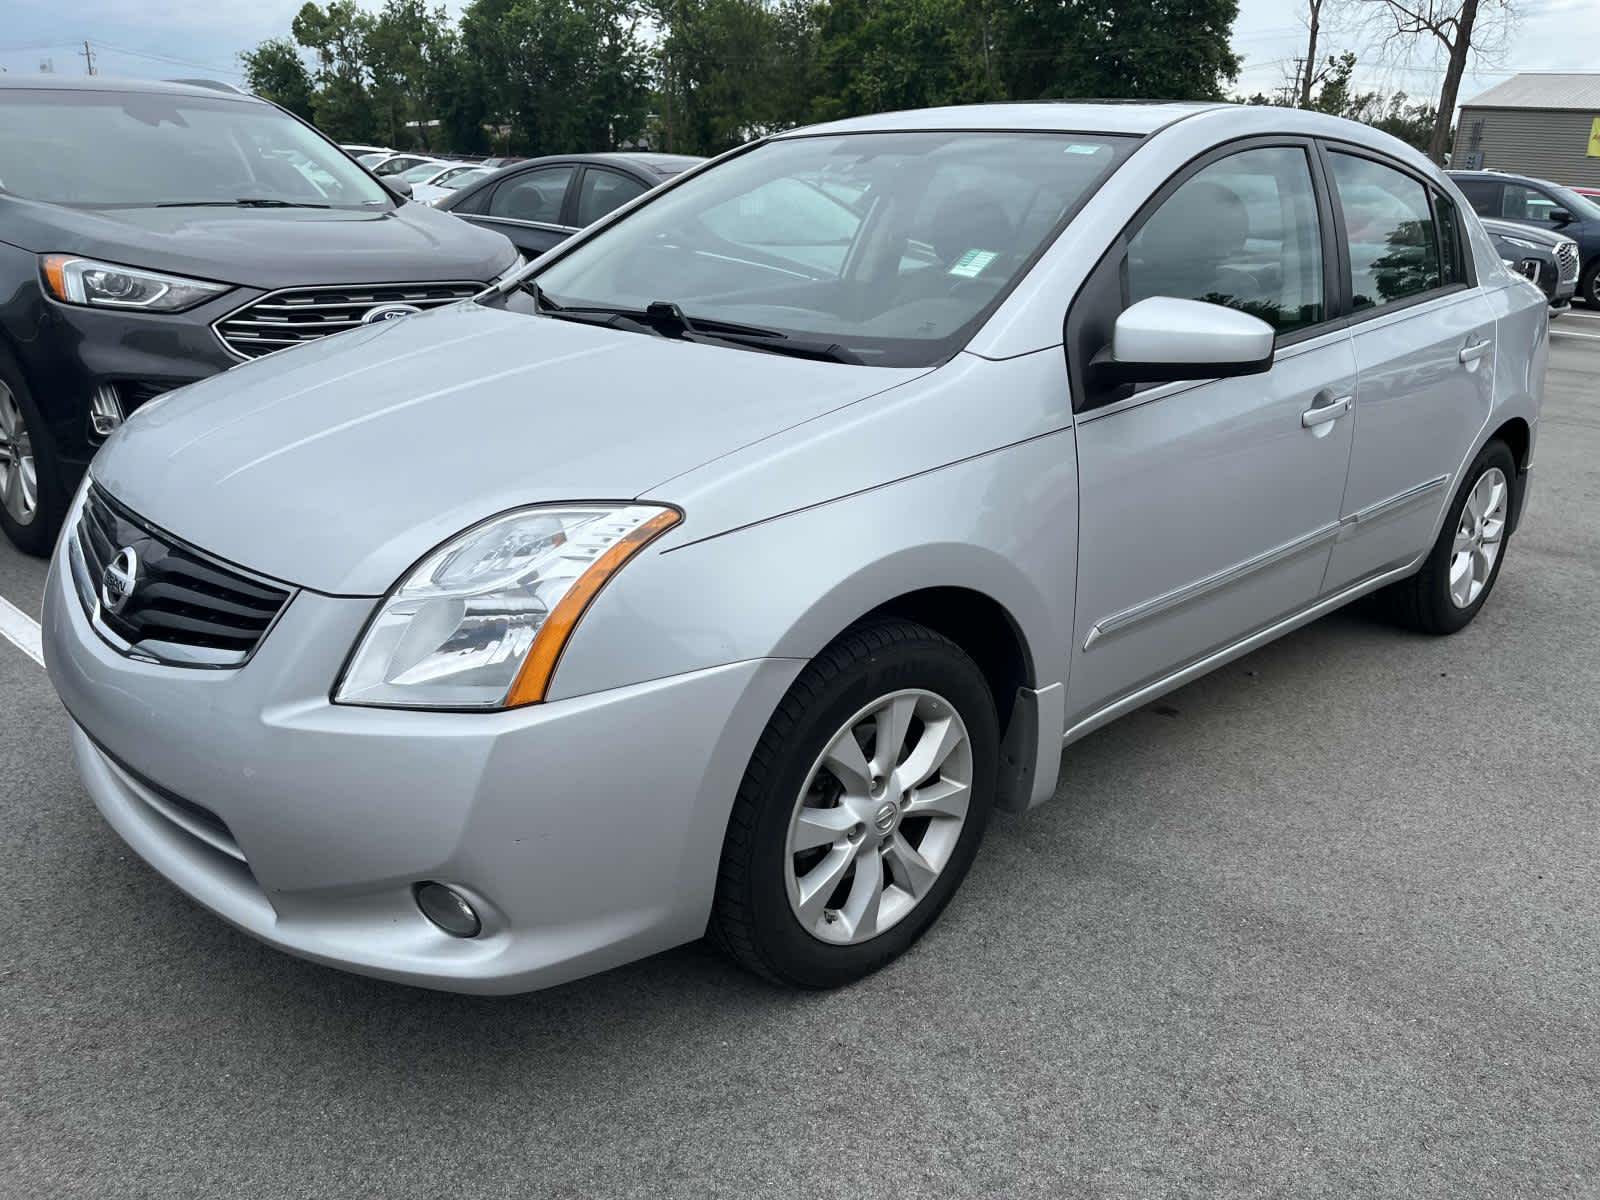 Used 2012 Nissan Sentra SL with VIN 3N1AB6AP6CL659904 for sale in Knoxville, TN